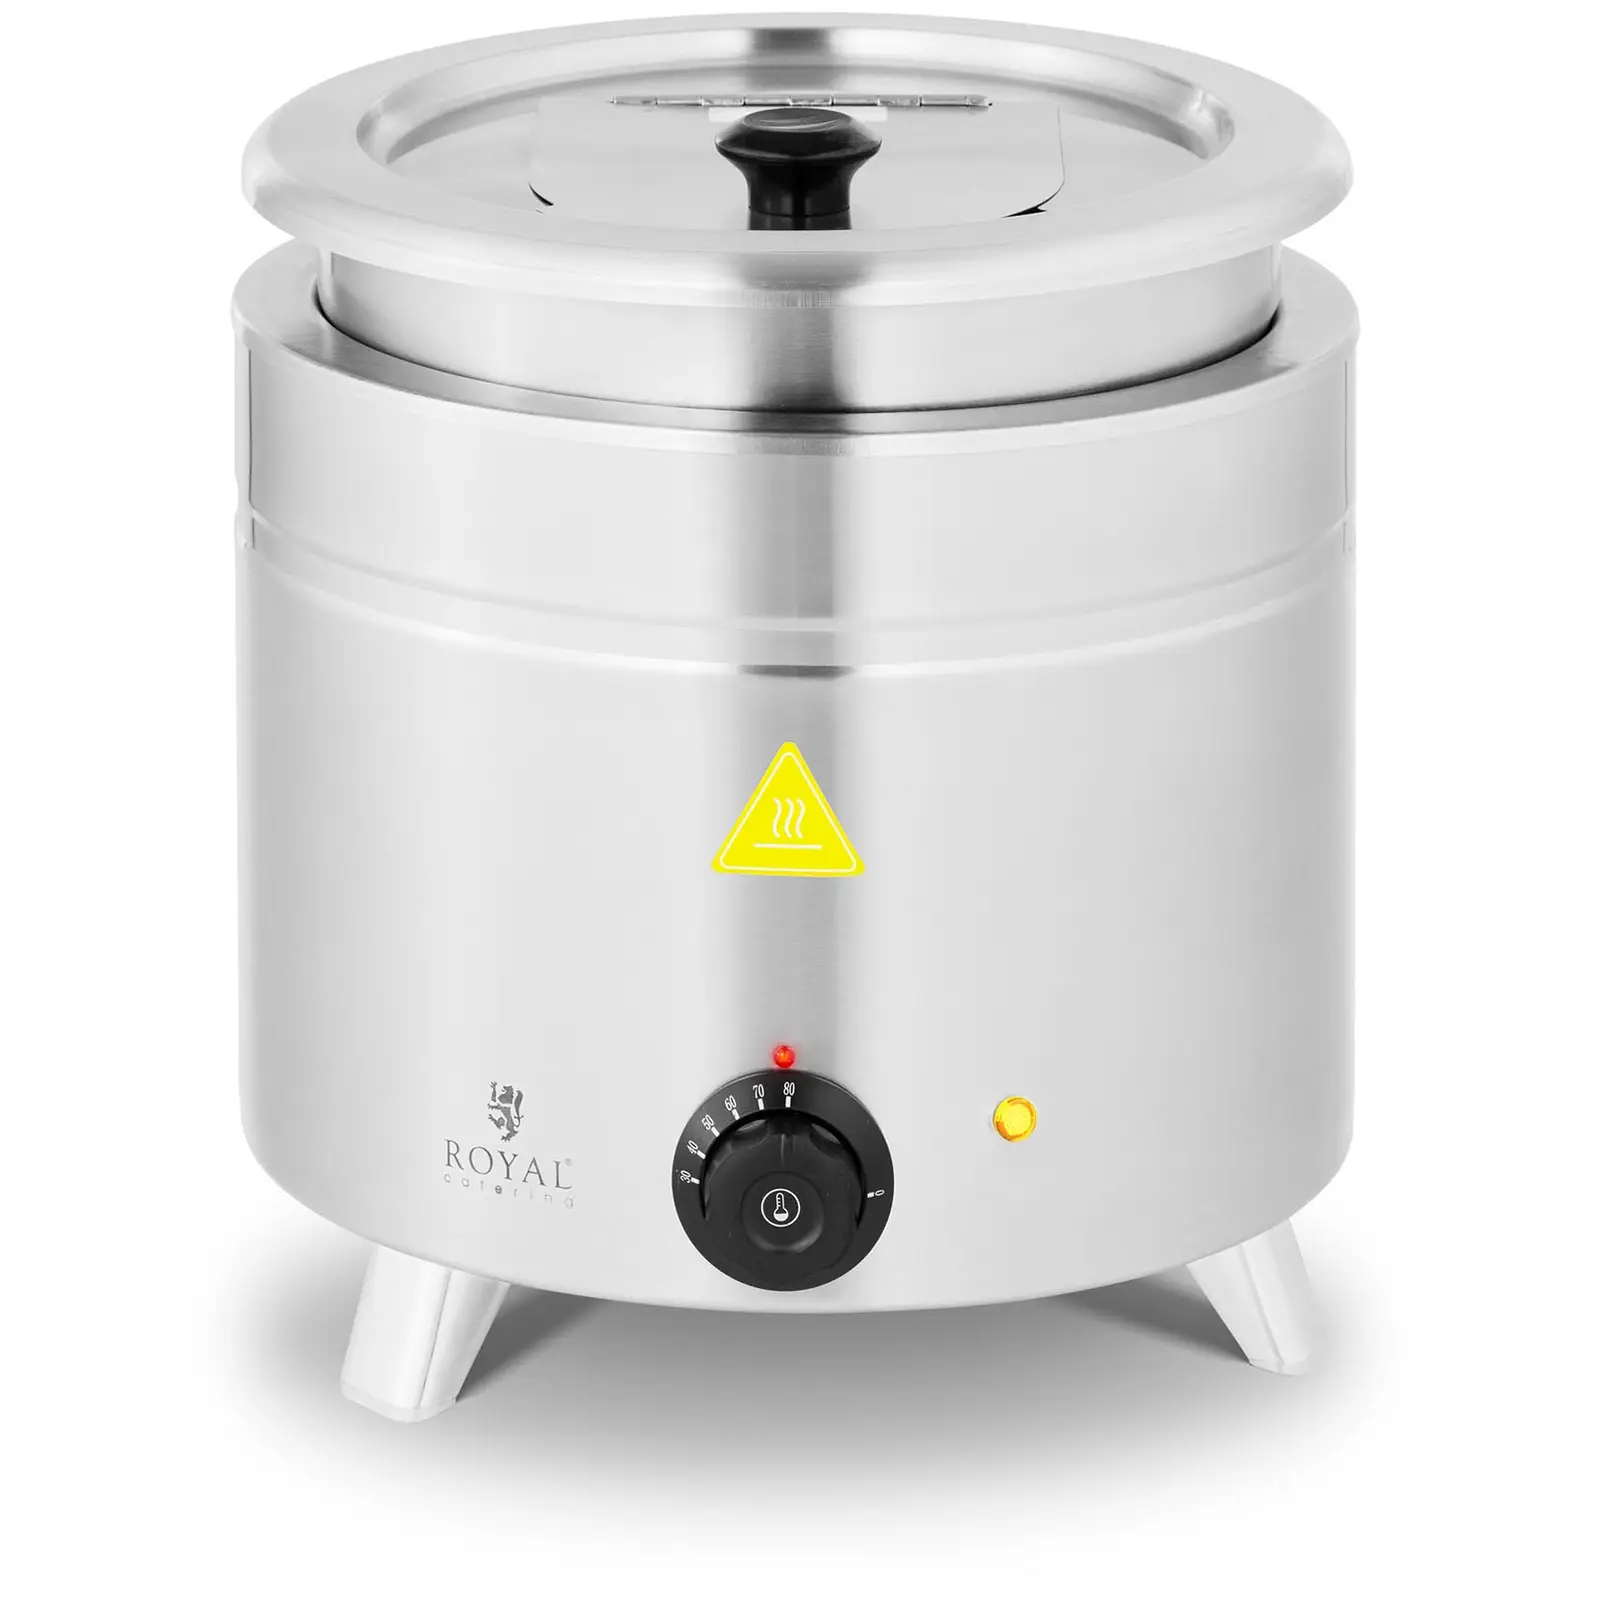 Soup Kettle - electrical - 11 L - Stainless steel